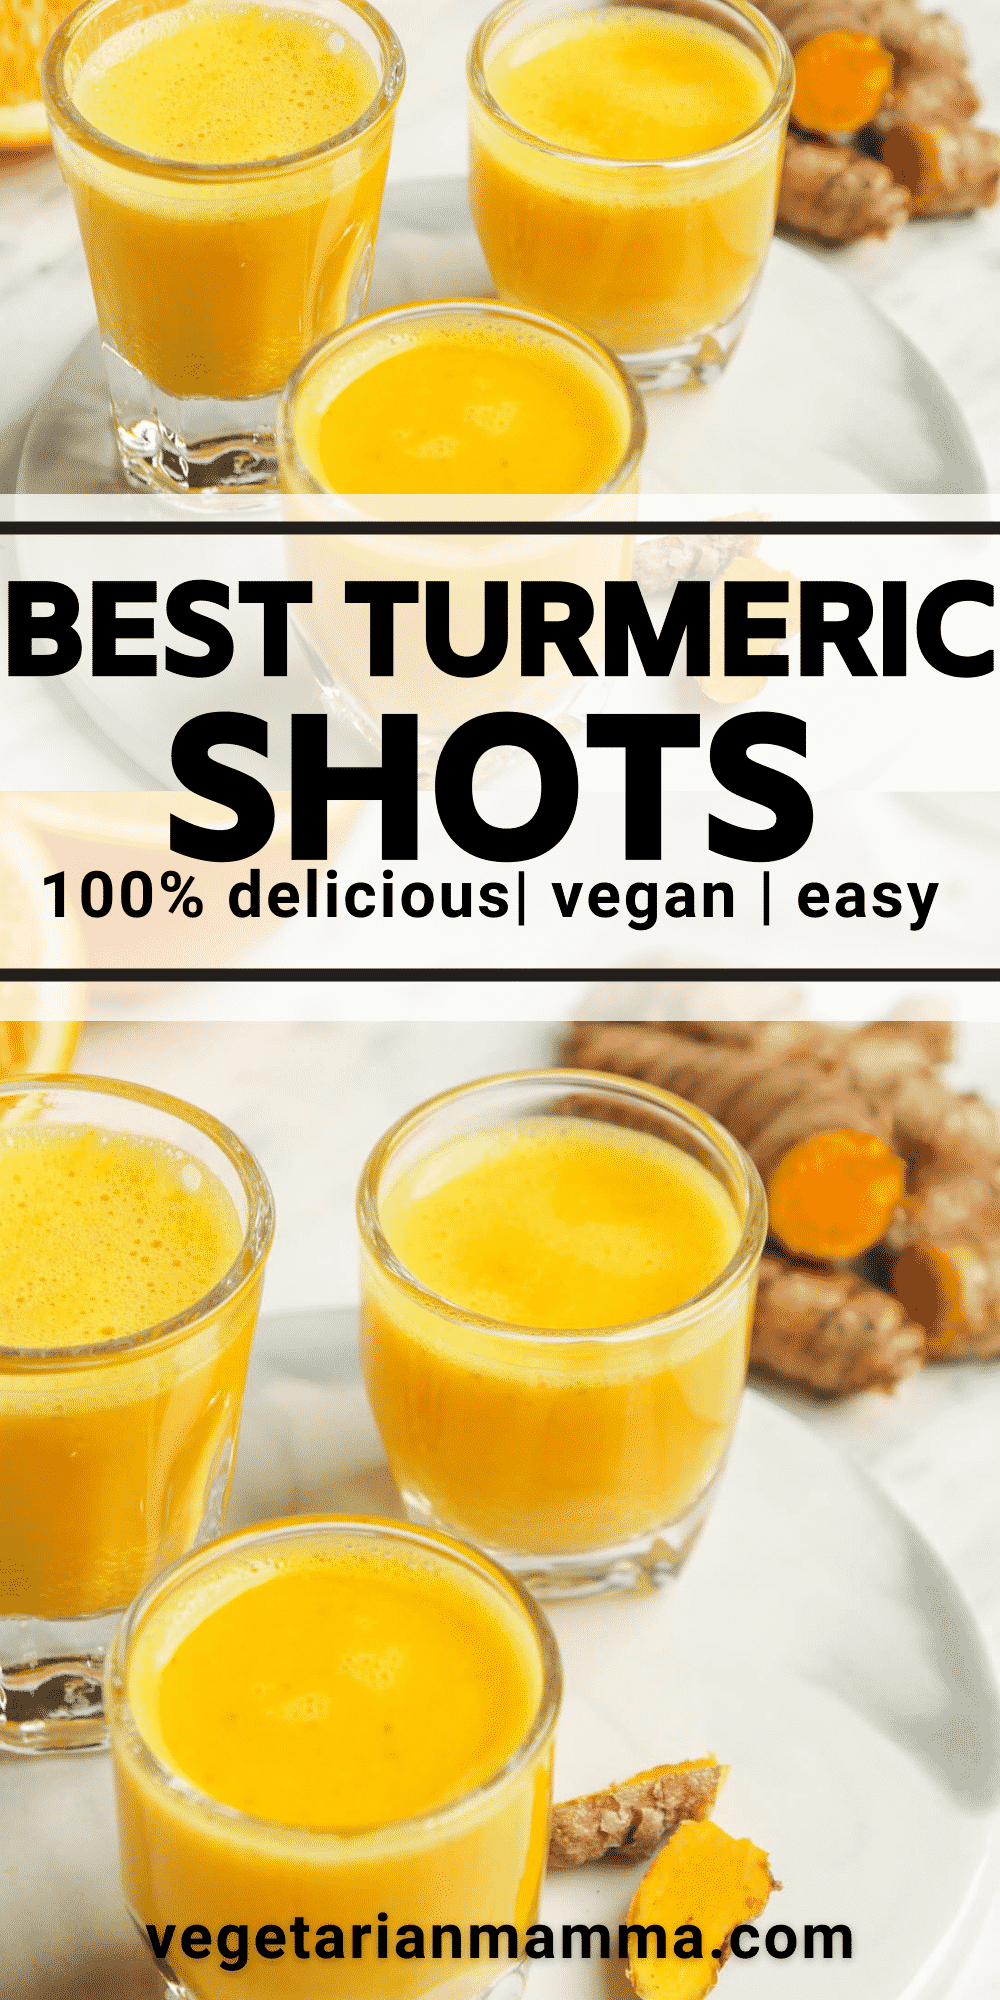 Turmeric shot pinnable image. Image has clear glasses filled with orange liquid, text overlay best turmeric shots